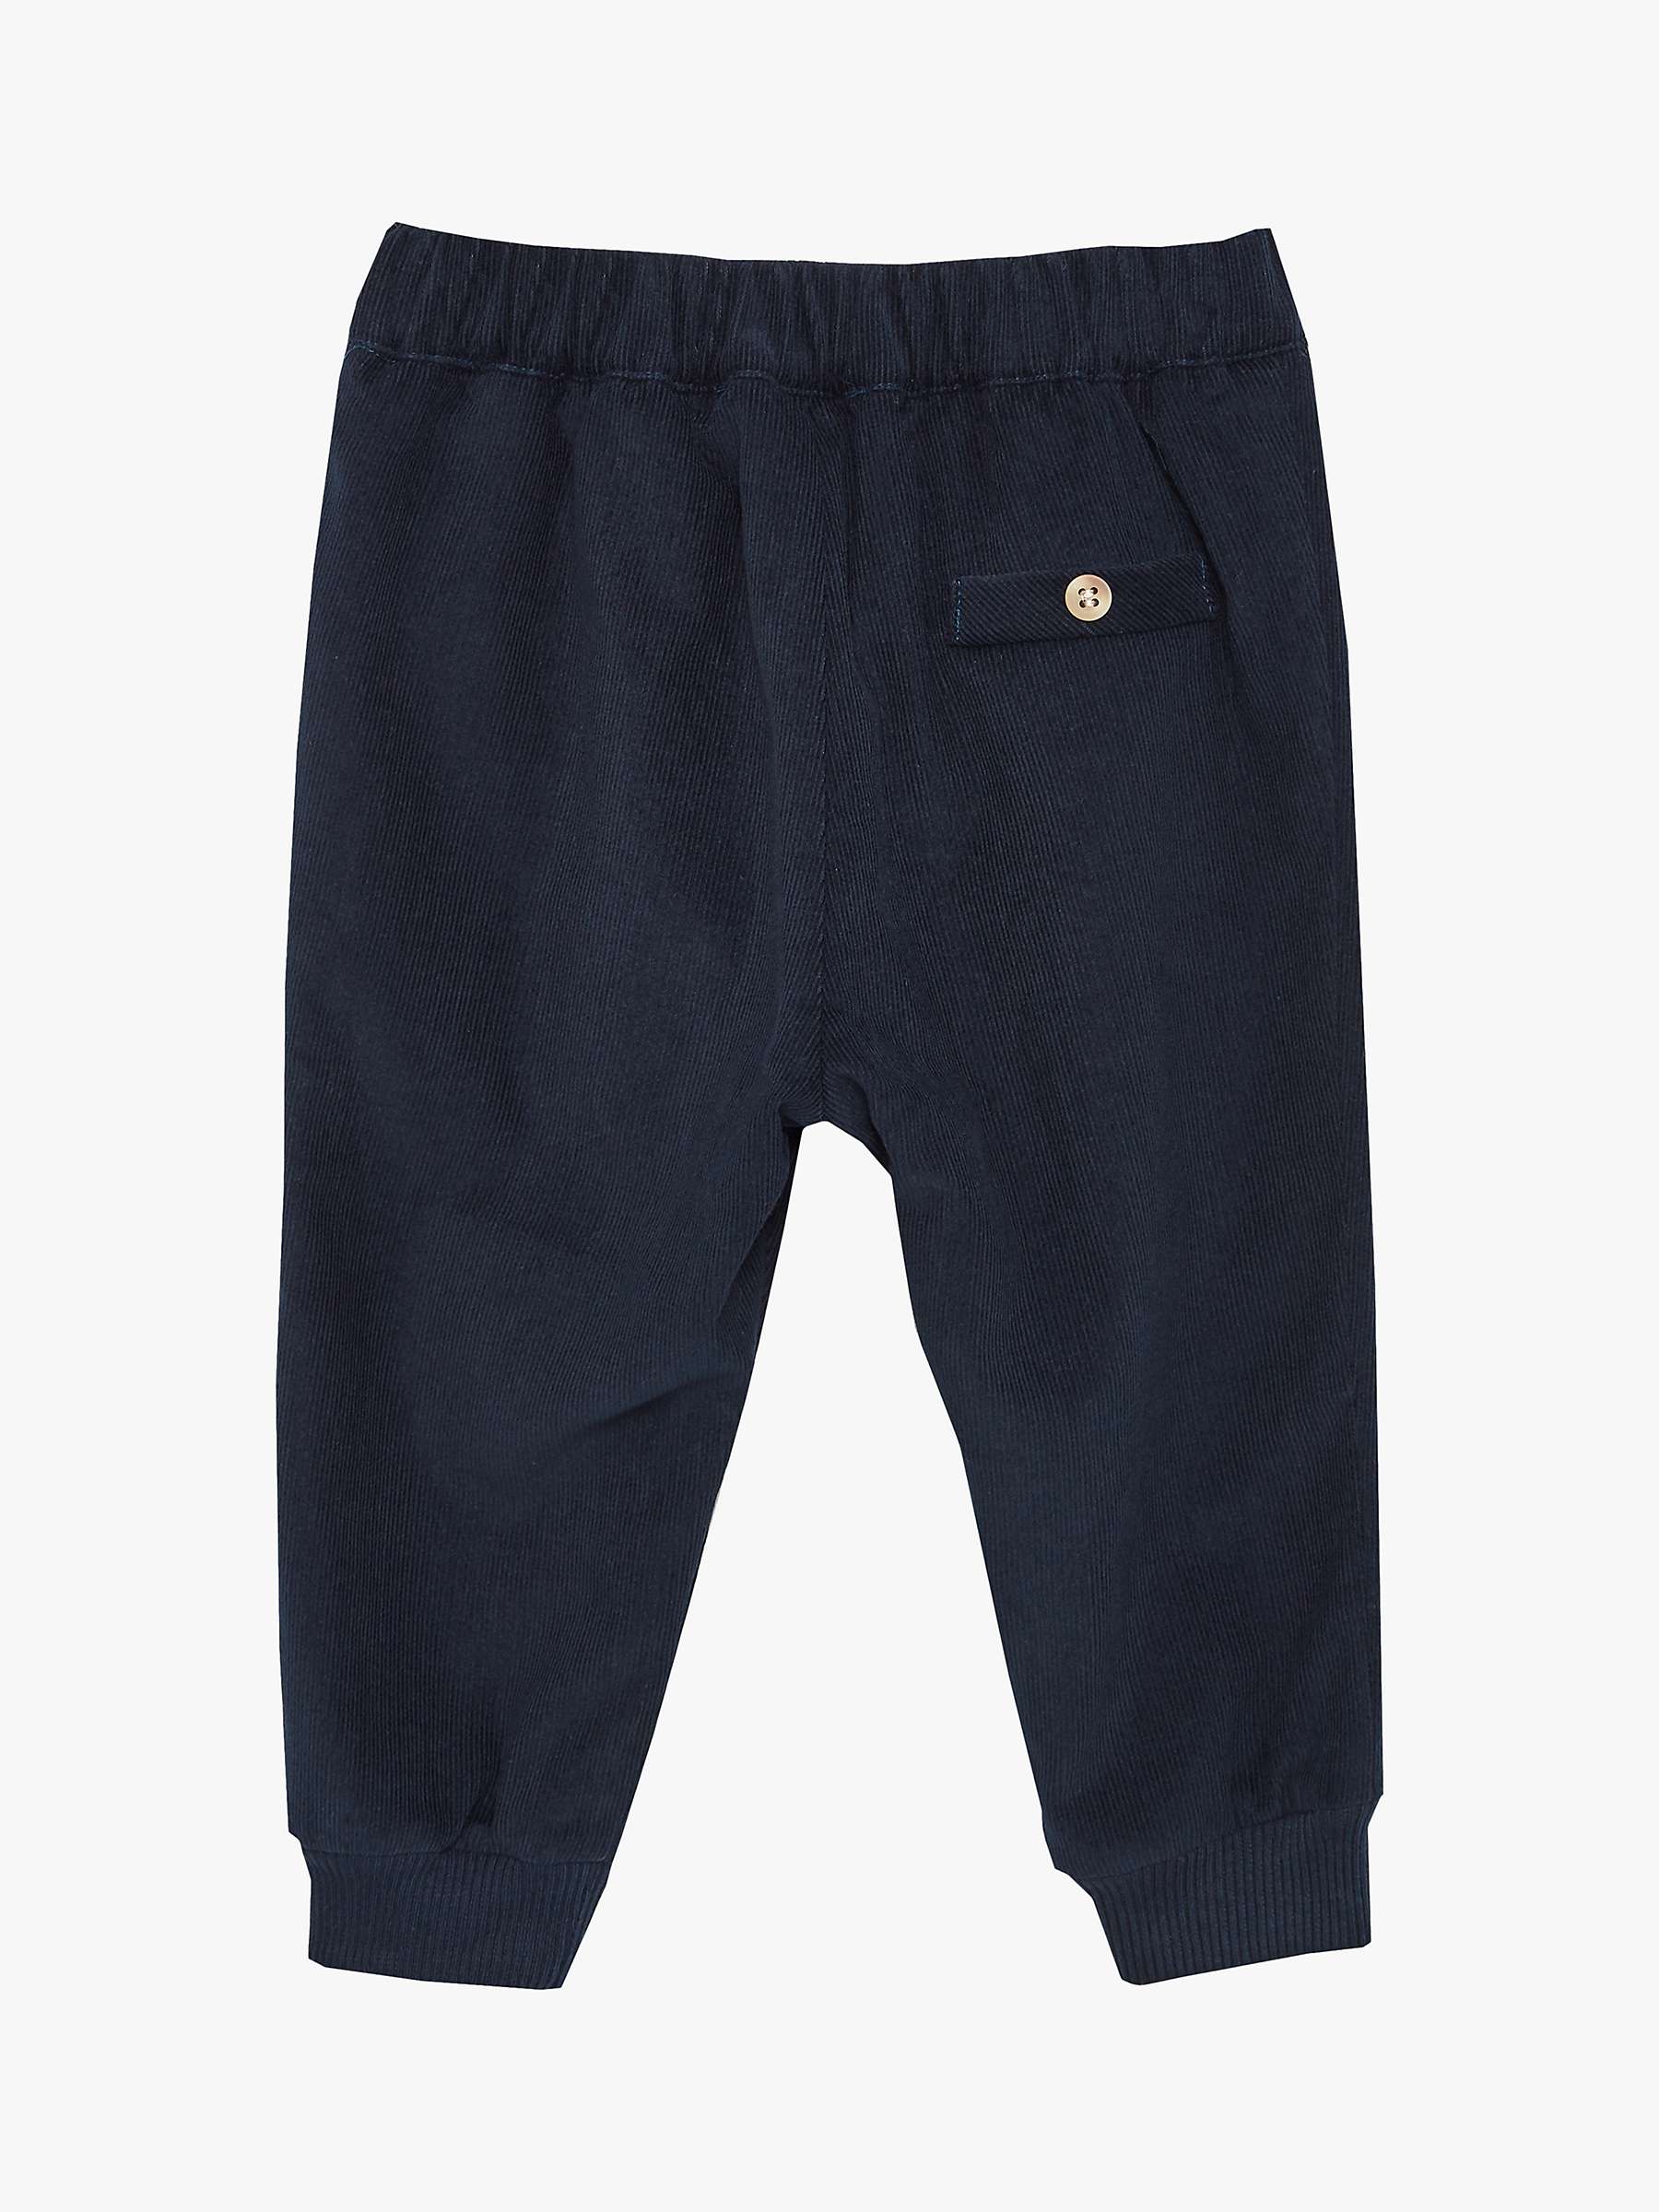 Buy Trotters Baby Orly Cotton Needle Cord Trousers, Navy Online at johnlewis.com